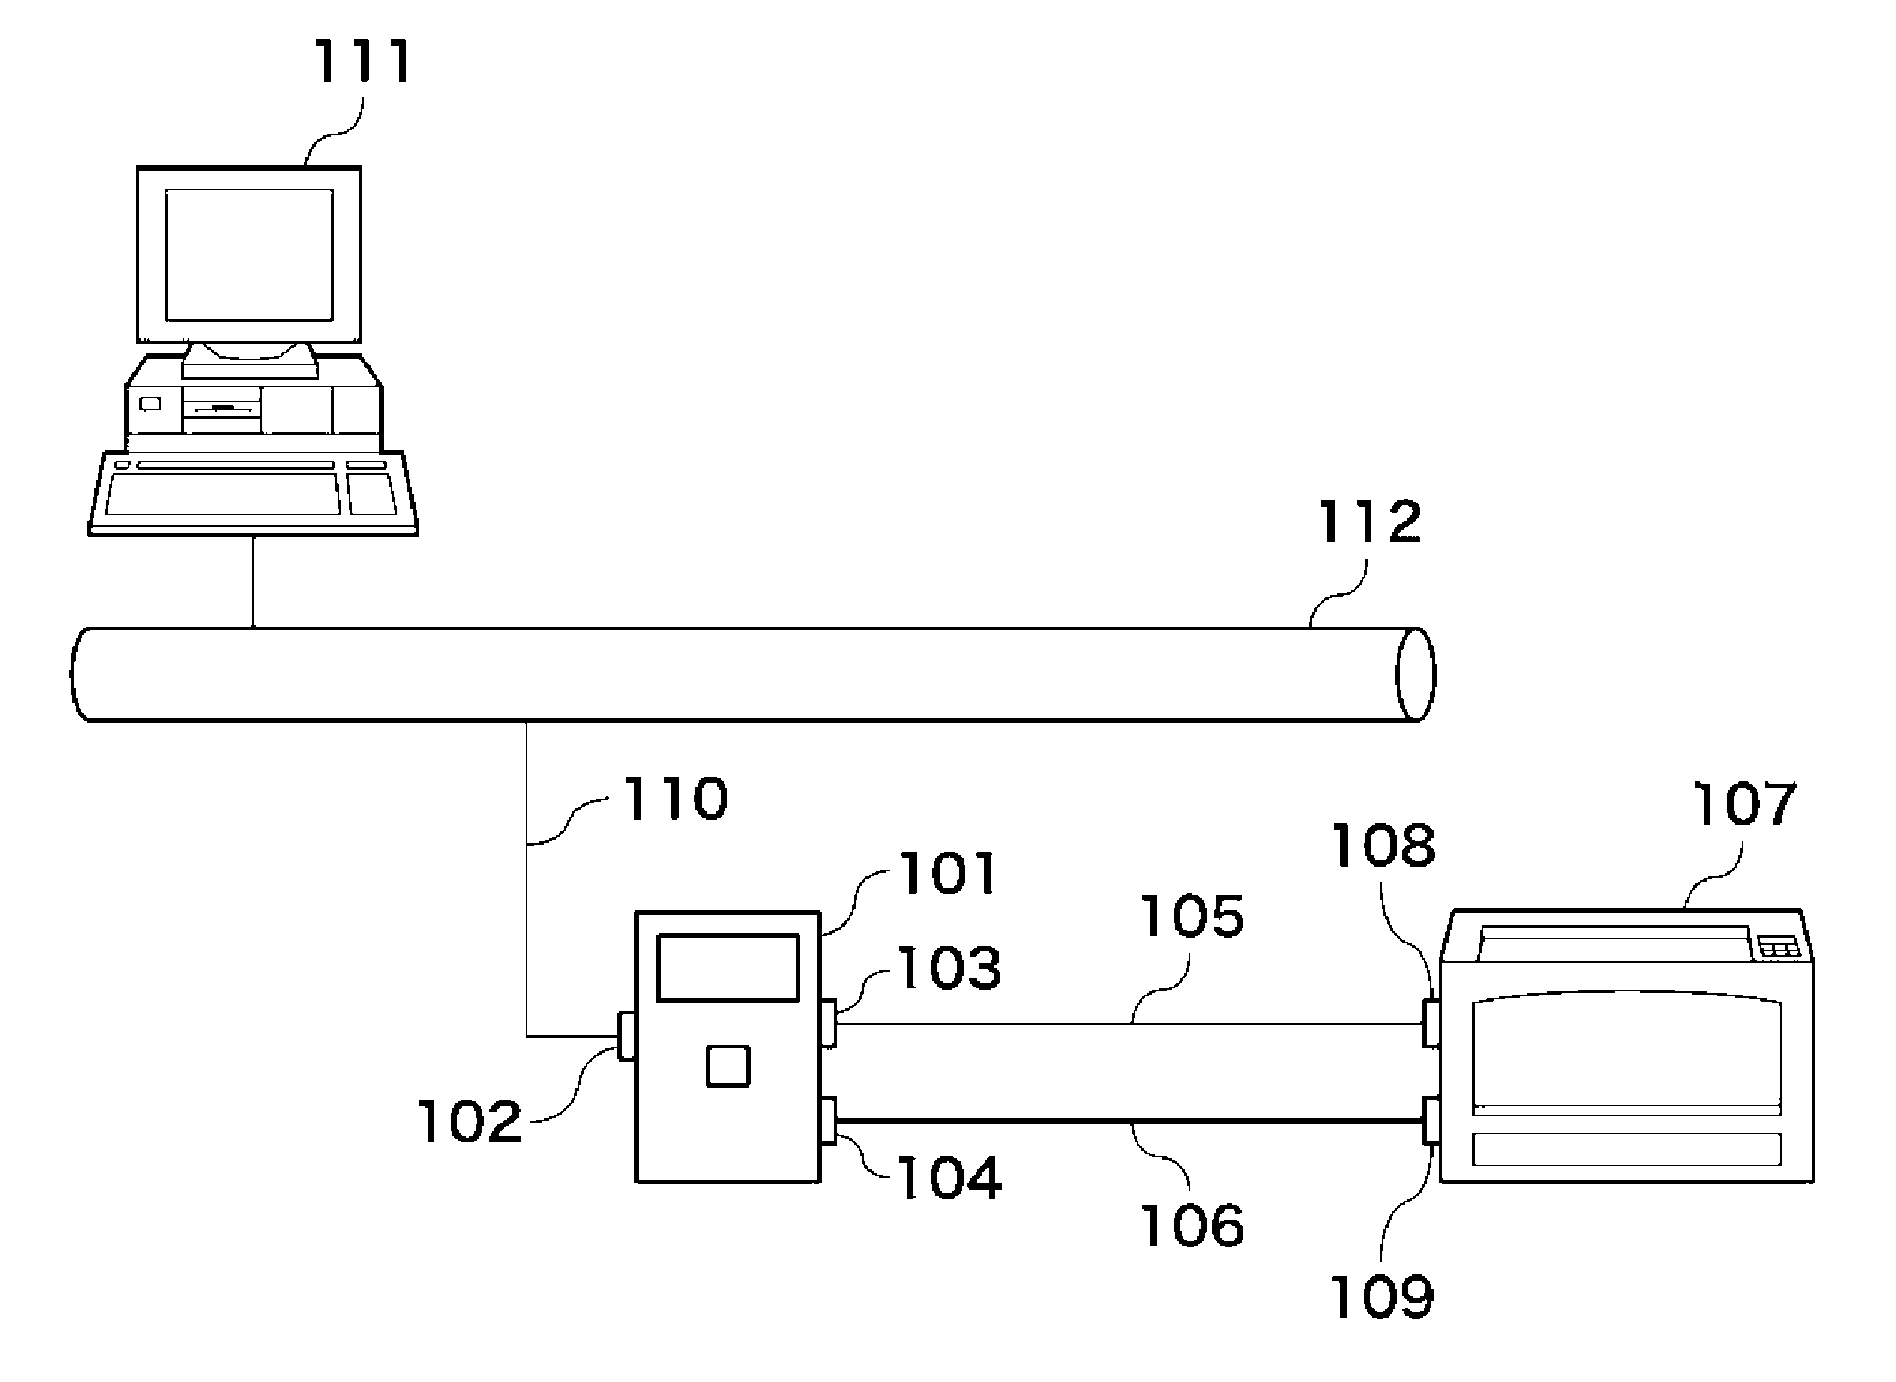 Image forming system including web server, web browser-equipped print control apparatus, and web browser-equipped image forming apparatus, and method of forming image in image forming system